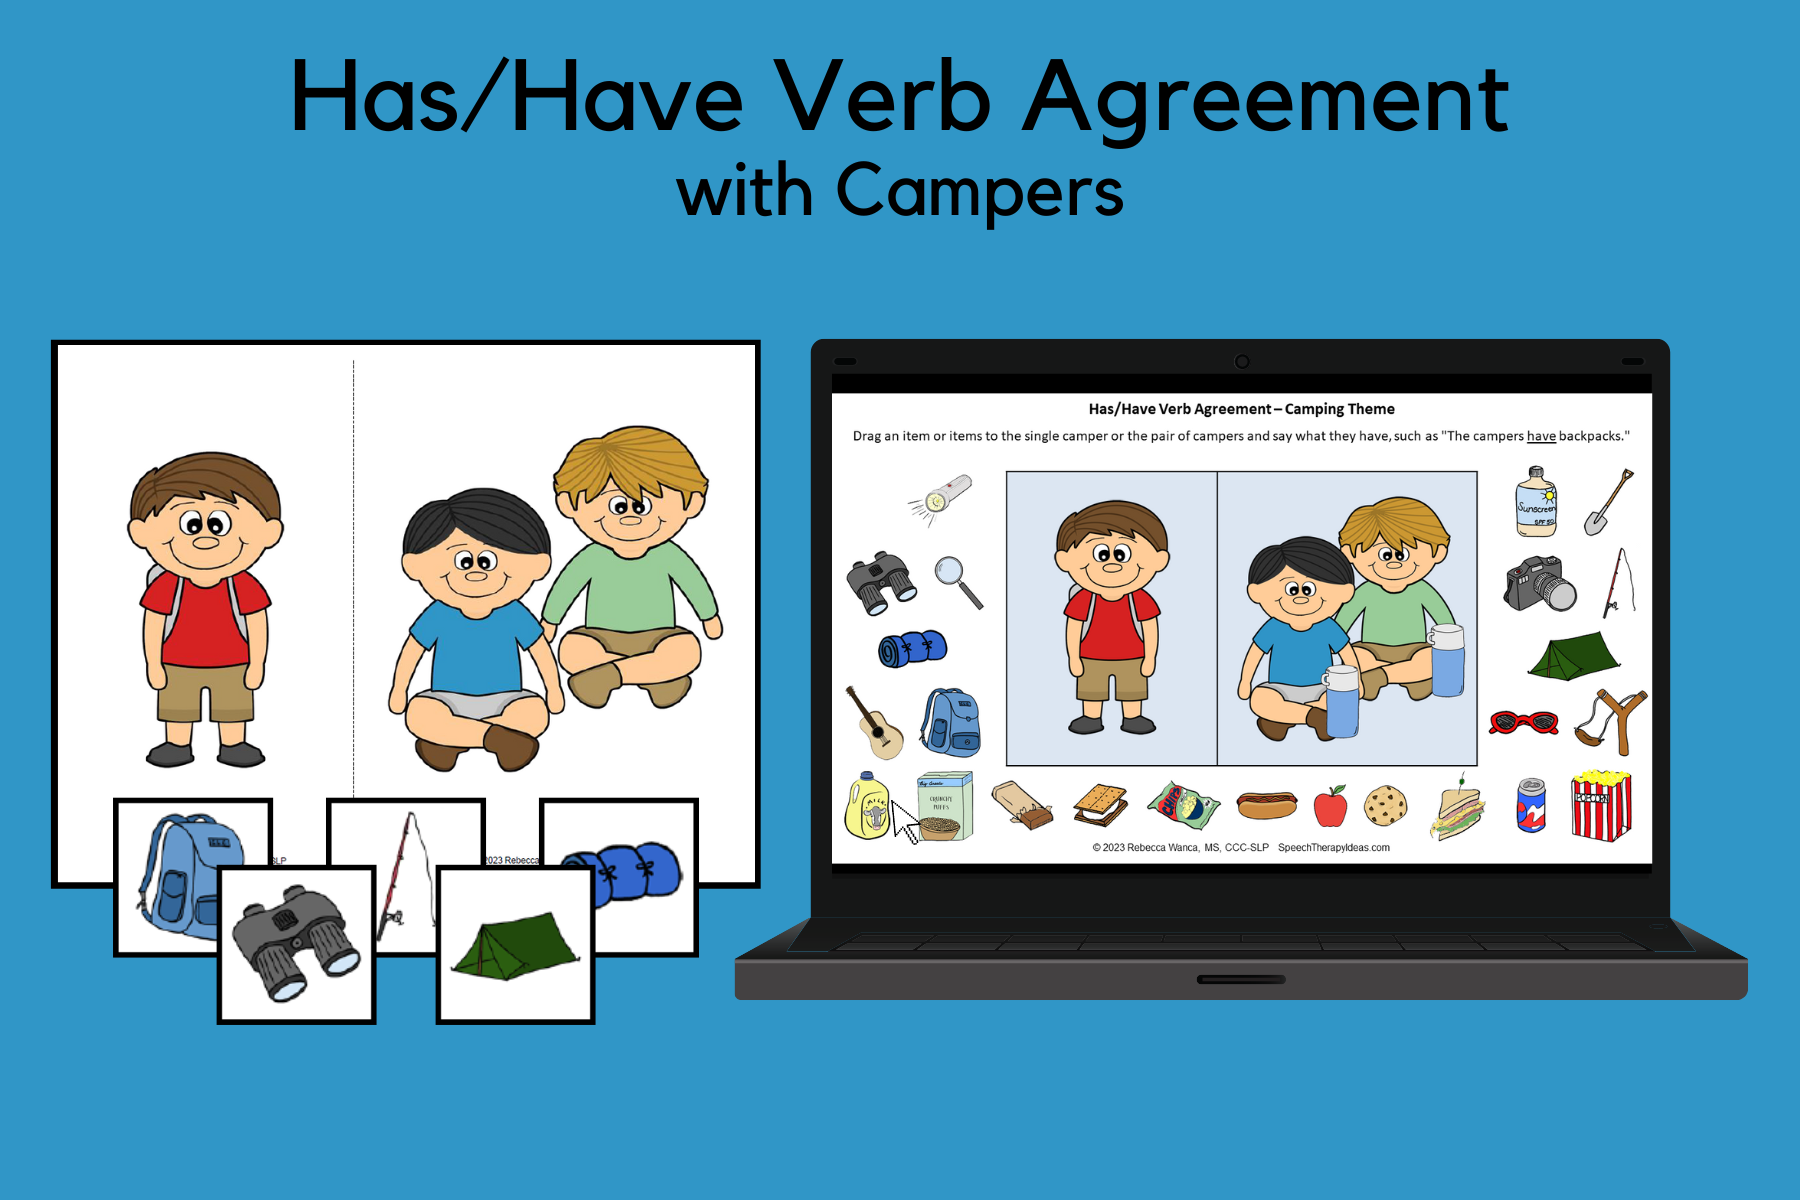 Has/Have Verb Agreement with Campers